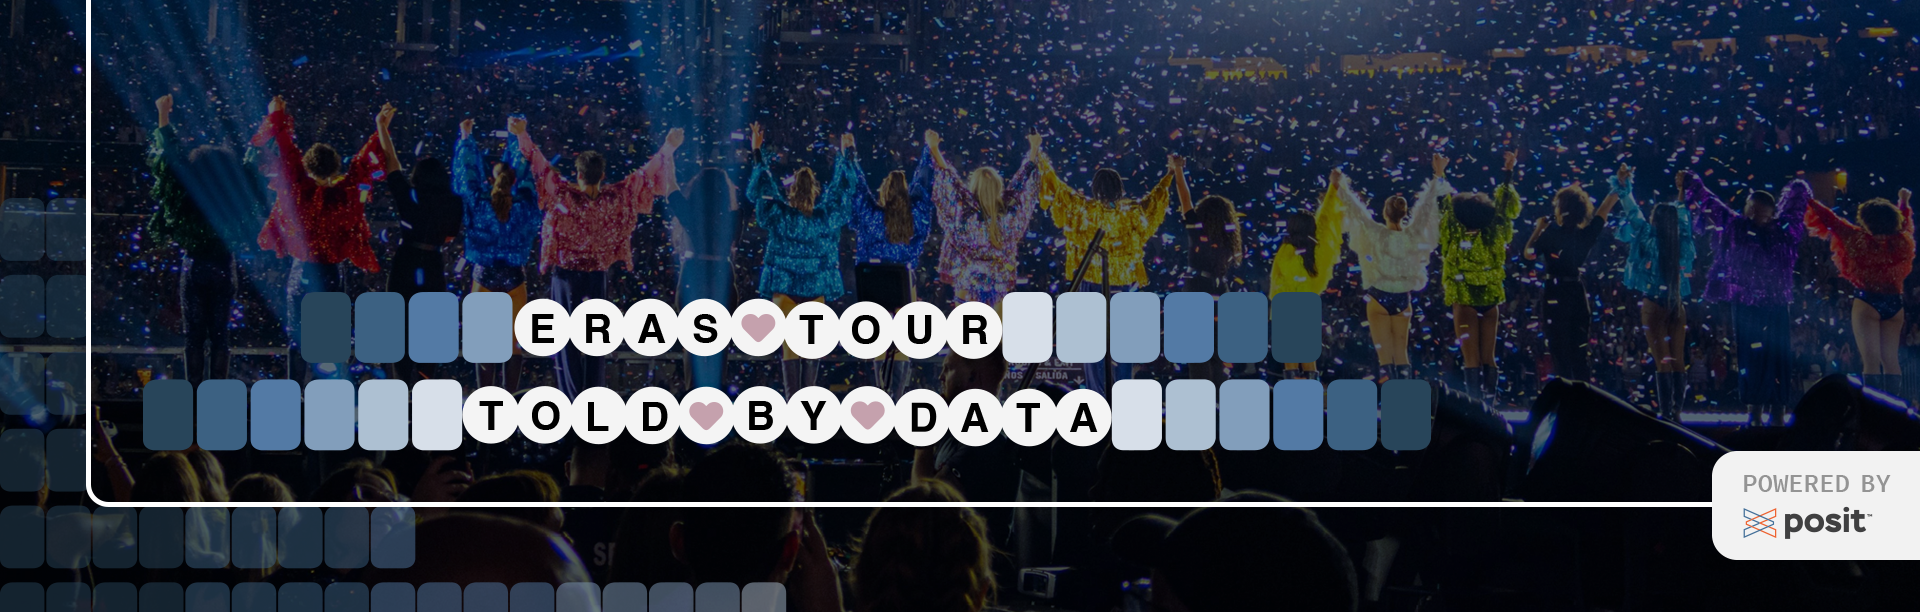 The image is a wide banner featuring a group of performers on stage, facing away from the camera, arms raised towards the audience. The performers are in colorful outfits, and the stage is lit with a concert atmosphere, including confetti in the air. Across the image, there is a blue overlay with the text ERAS TOUR TOLD BY DATA in a mix of clear and obscured letters, with heart symbols replacing the O in TOUR and BY. In the bottom right corner, there is a logo with the text Powered by Posit.